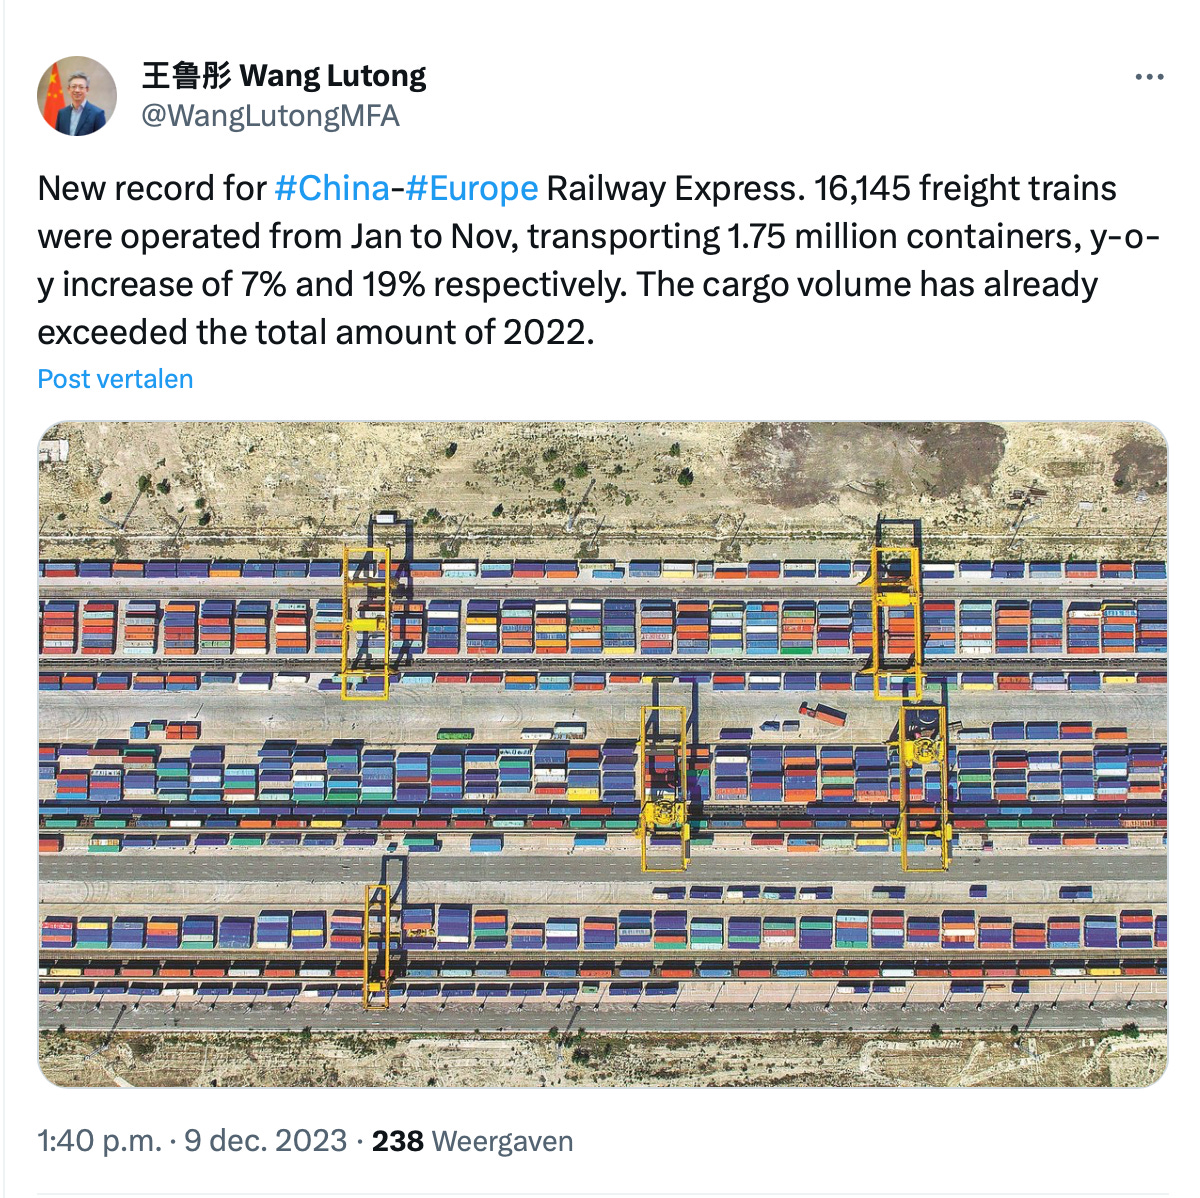 Tweet by Wang Lutong: ‘New record for #China-#Europe Railway Express. 16,145 freight trains were operated from Jan to Nov, transporting 1.75 million containers, y-o-y increase of 7% and 19% respectively. The cargo volume has already exceeded the total amount of 2022.’